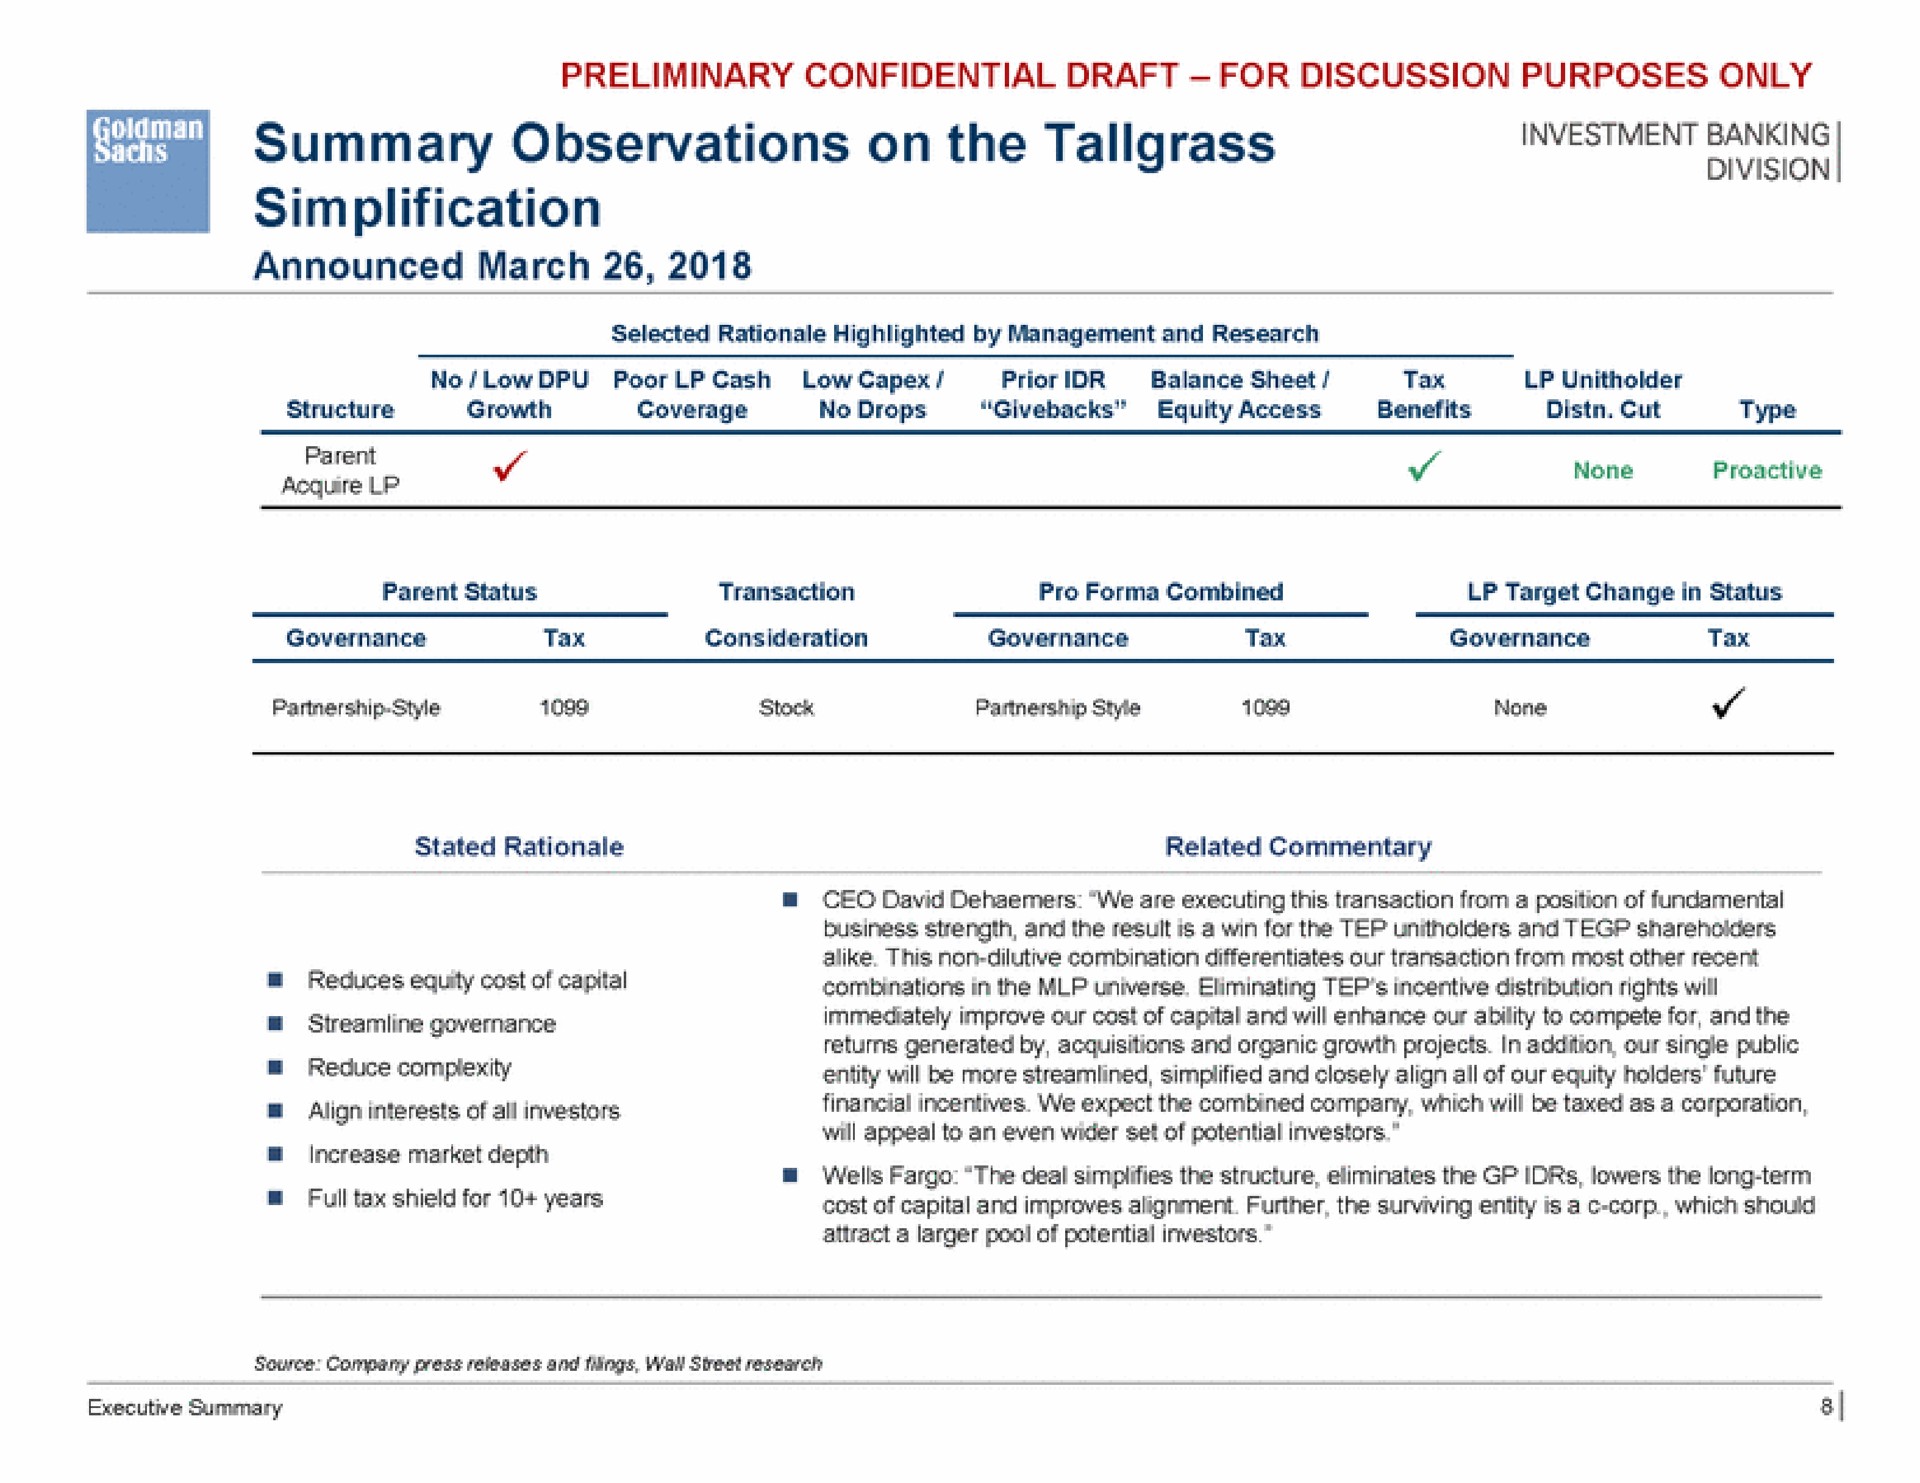 pet summary observations on the simplification | Goldman Sachs